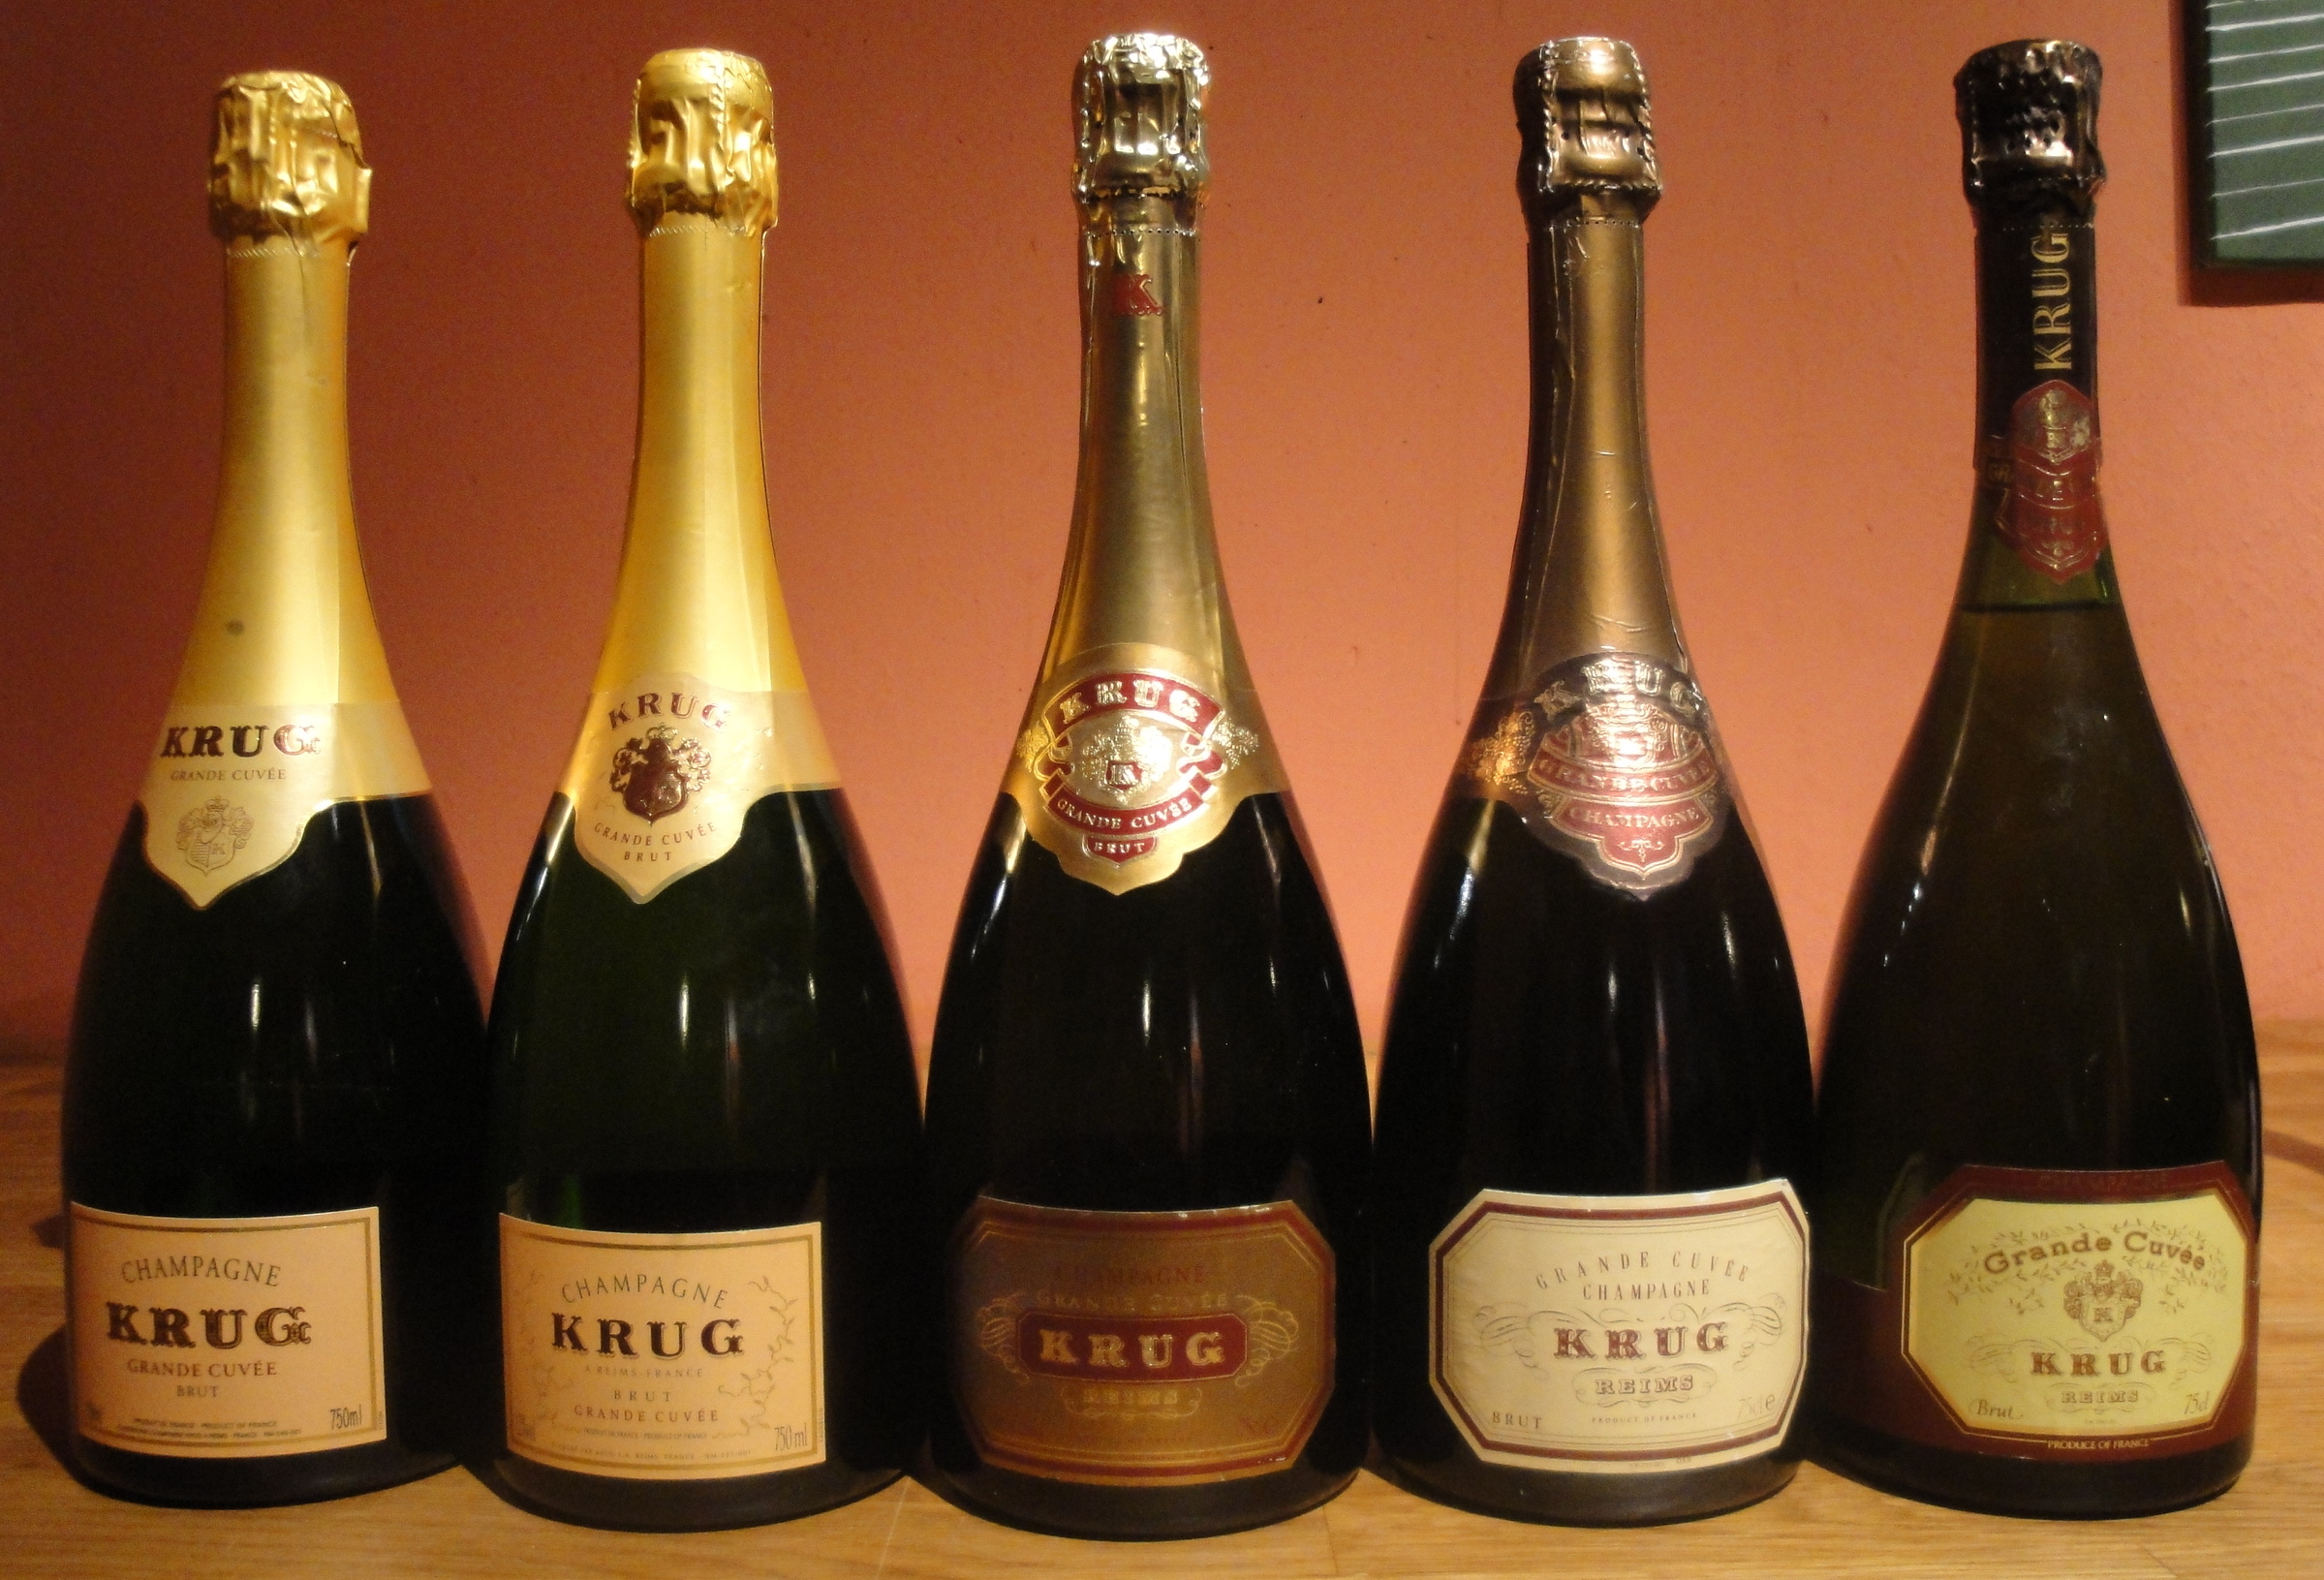 How to identify the age of a Krug Grande Cuvée | Tomas's wine blog